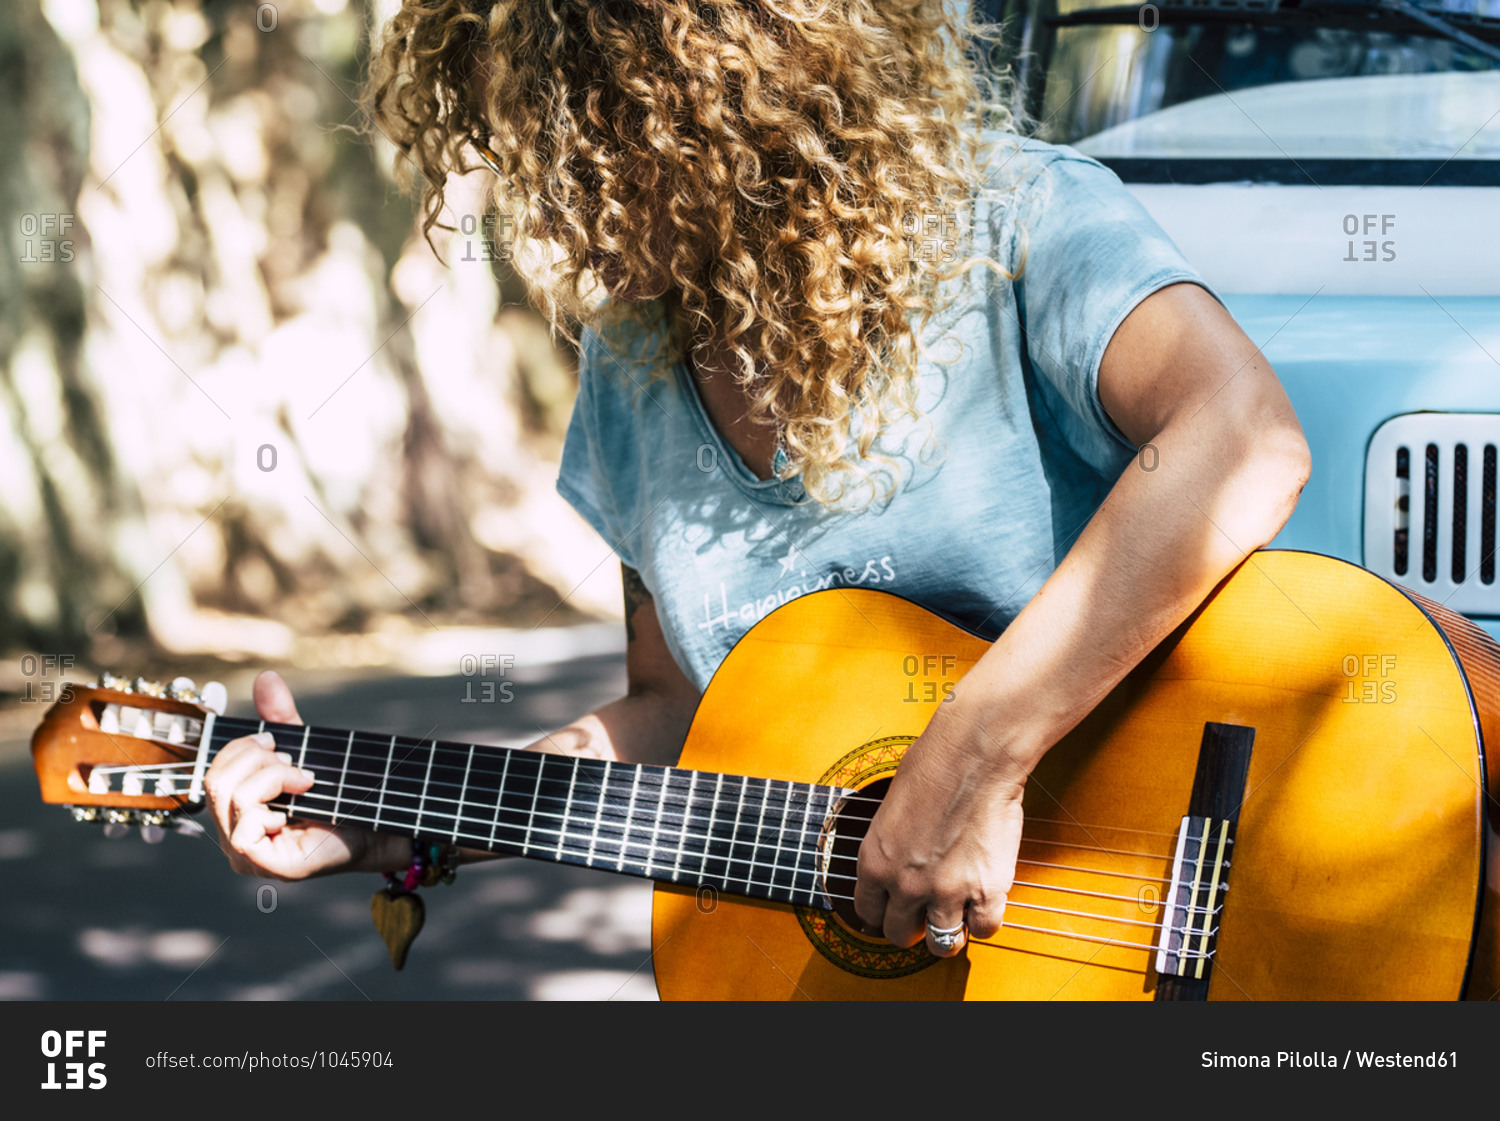 Mature woman with curly hair playing guitar while leaning on motor home